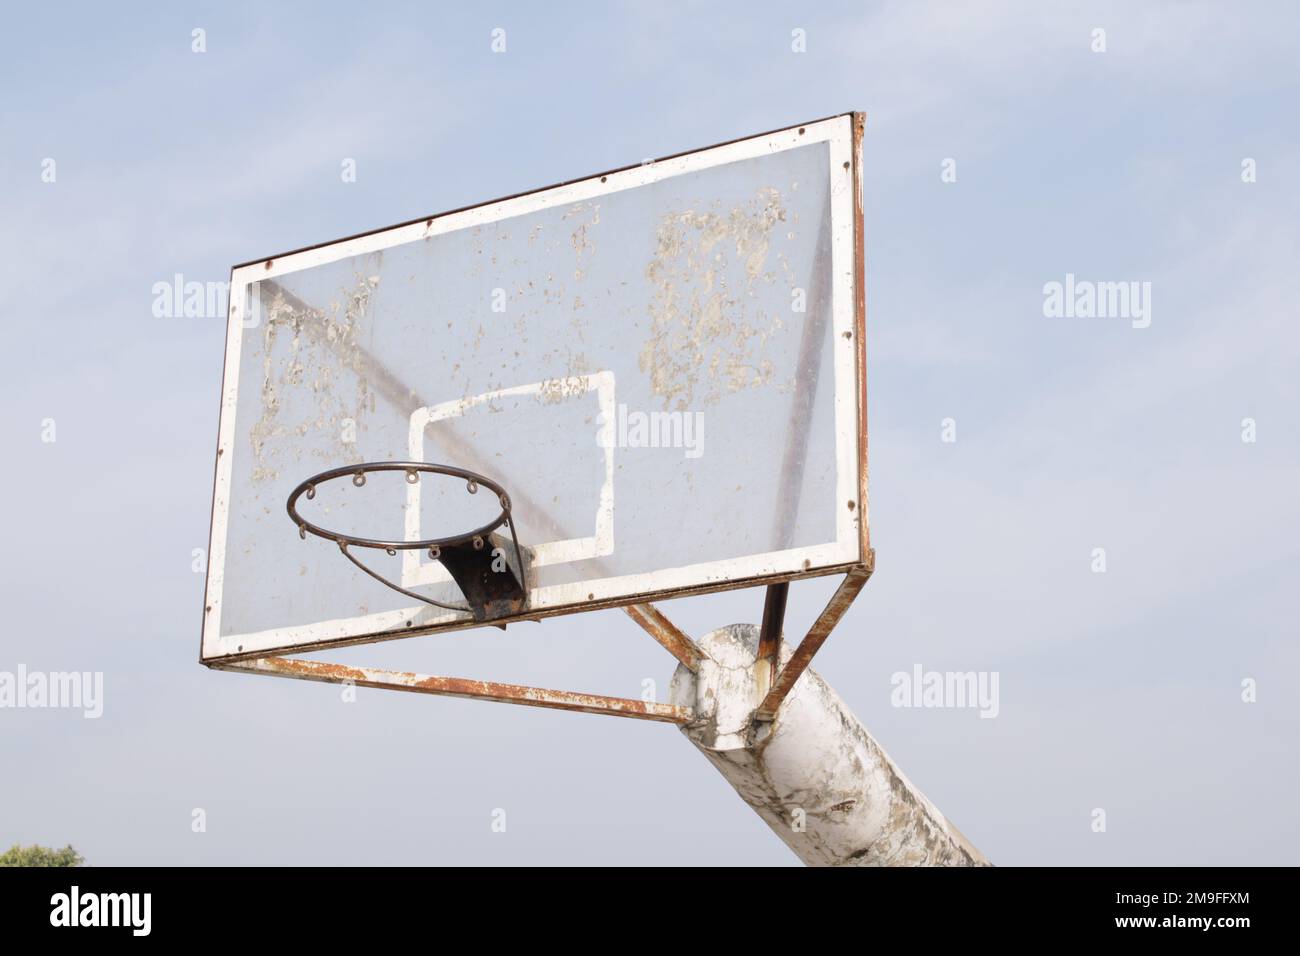 Basketball hoop on blue sky with clouds background Stock Photo